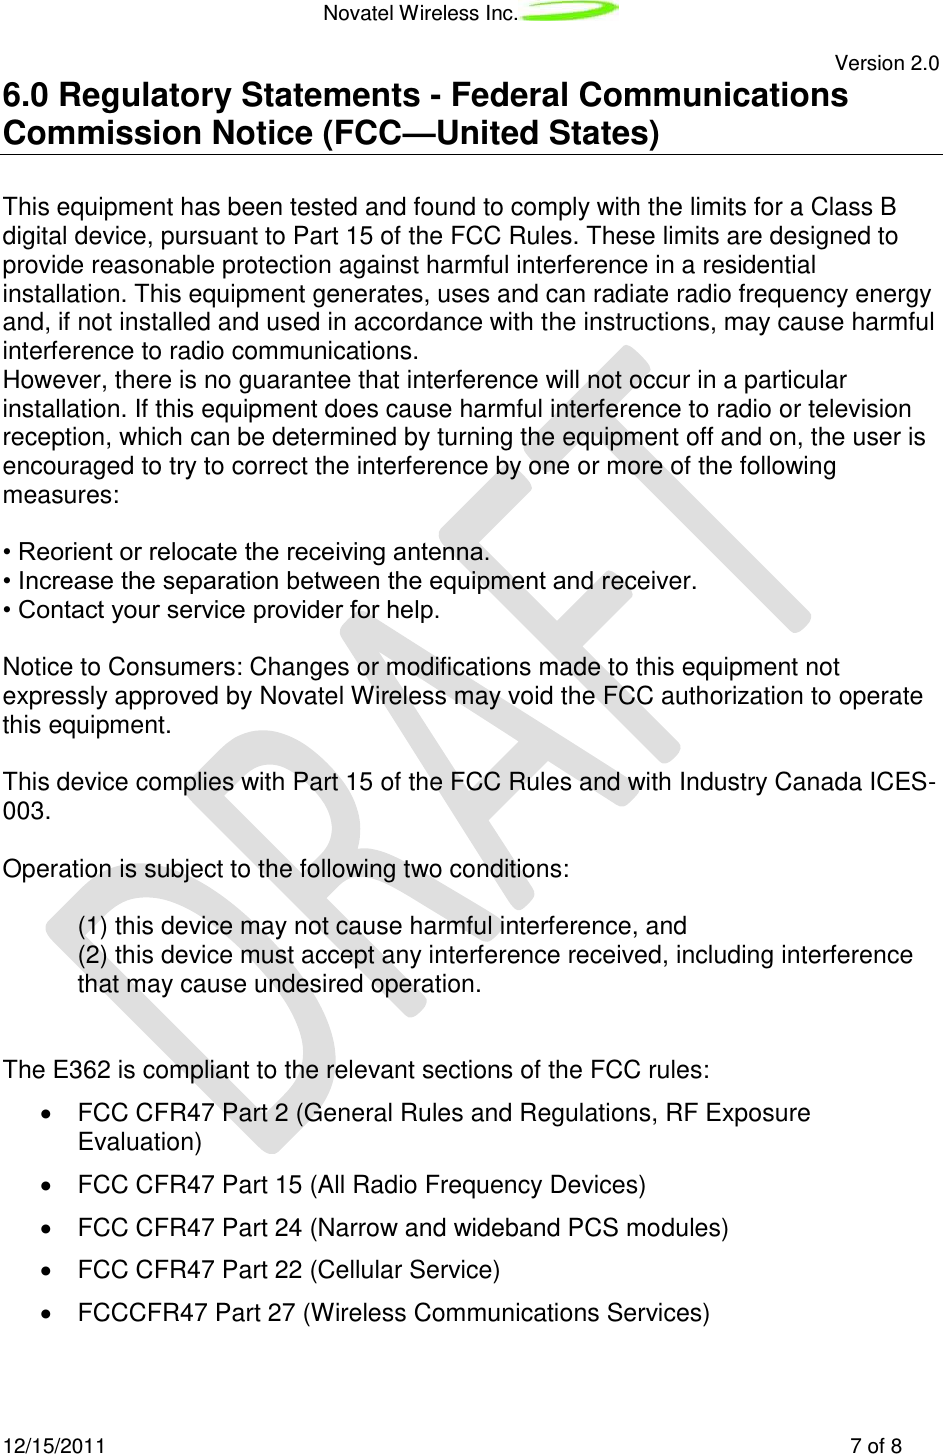 Novatel Wireless Inc.   Version 2.0 12/15/2011    7 of 8 6.0 Regulatory Statements - Federal Communications Commission Notice (FCC—United States)  This equipment has been tested and found to comply with the limits for a Class B digital device, pursuant to Part 15 of the FCC Rules. These limits are designed to provide reasonable protection against harmful interference in a residential installation. This equipment generates, uses and can radiate radio frequency energy and, if not installed and used in accordance with the instructions, may cause harmful interference to radio communications. However, there is no guarantee that interference will not occur in a particular installation. If this equipment does cause harmful interference to radio or television reception, which can be determined by turning the equipment off and on, the user is encouraged to try to correct the interference by one or more of the following measures:  • Reorient or relocate the receiving antenna. • Increase the separation between the equipment and receiver. • Contact your service provider for help.  Notice to Consumers: Changes or modifications made to this equipment not expressly approved by Novatel Wireless may void the FCC authorization to operate this equipment.  This device complies with Part 15 of the FCC Rules and with Industry Canada ICES-003.  Operation is subject to the following two conditions:  (1) this device may not cause harmful interference, and (2) this device must accept any interference received, including interference that may cause undesired operation.   The E362 is compliant to the relevant sections of the FCC rules:   FCC CFR47 Part 2 (General Rules and Regulations, RF Exposure Evaluation)   FCC CFR47 Part 15 (All Radio Frequency Devices)   FCC CFR47 Part 24 (Narrow and wideband PCS modules)   FCC CFR47 Part 22 (Cellular Service)   FCCCFR47 Part 27 (Wireless Communications Services) 